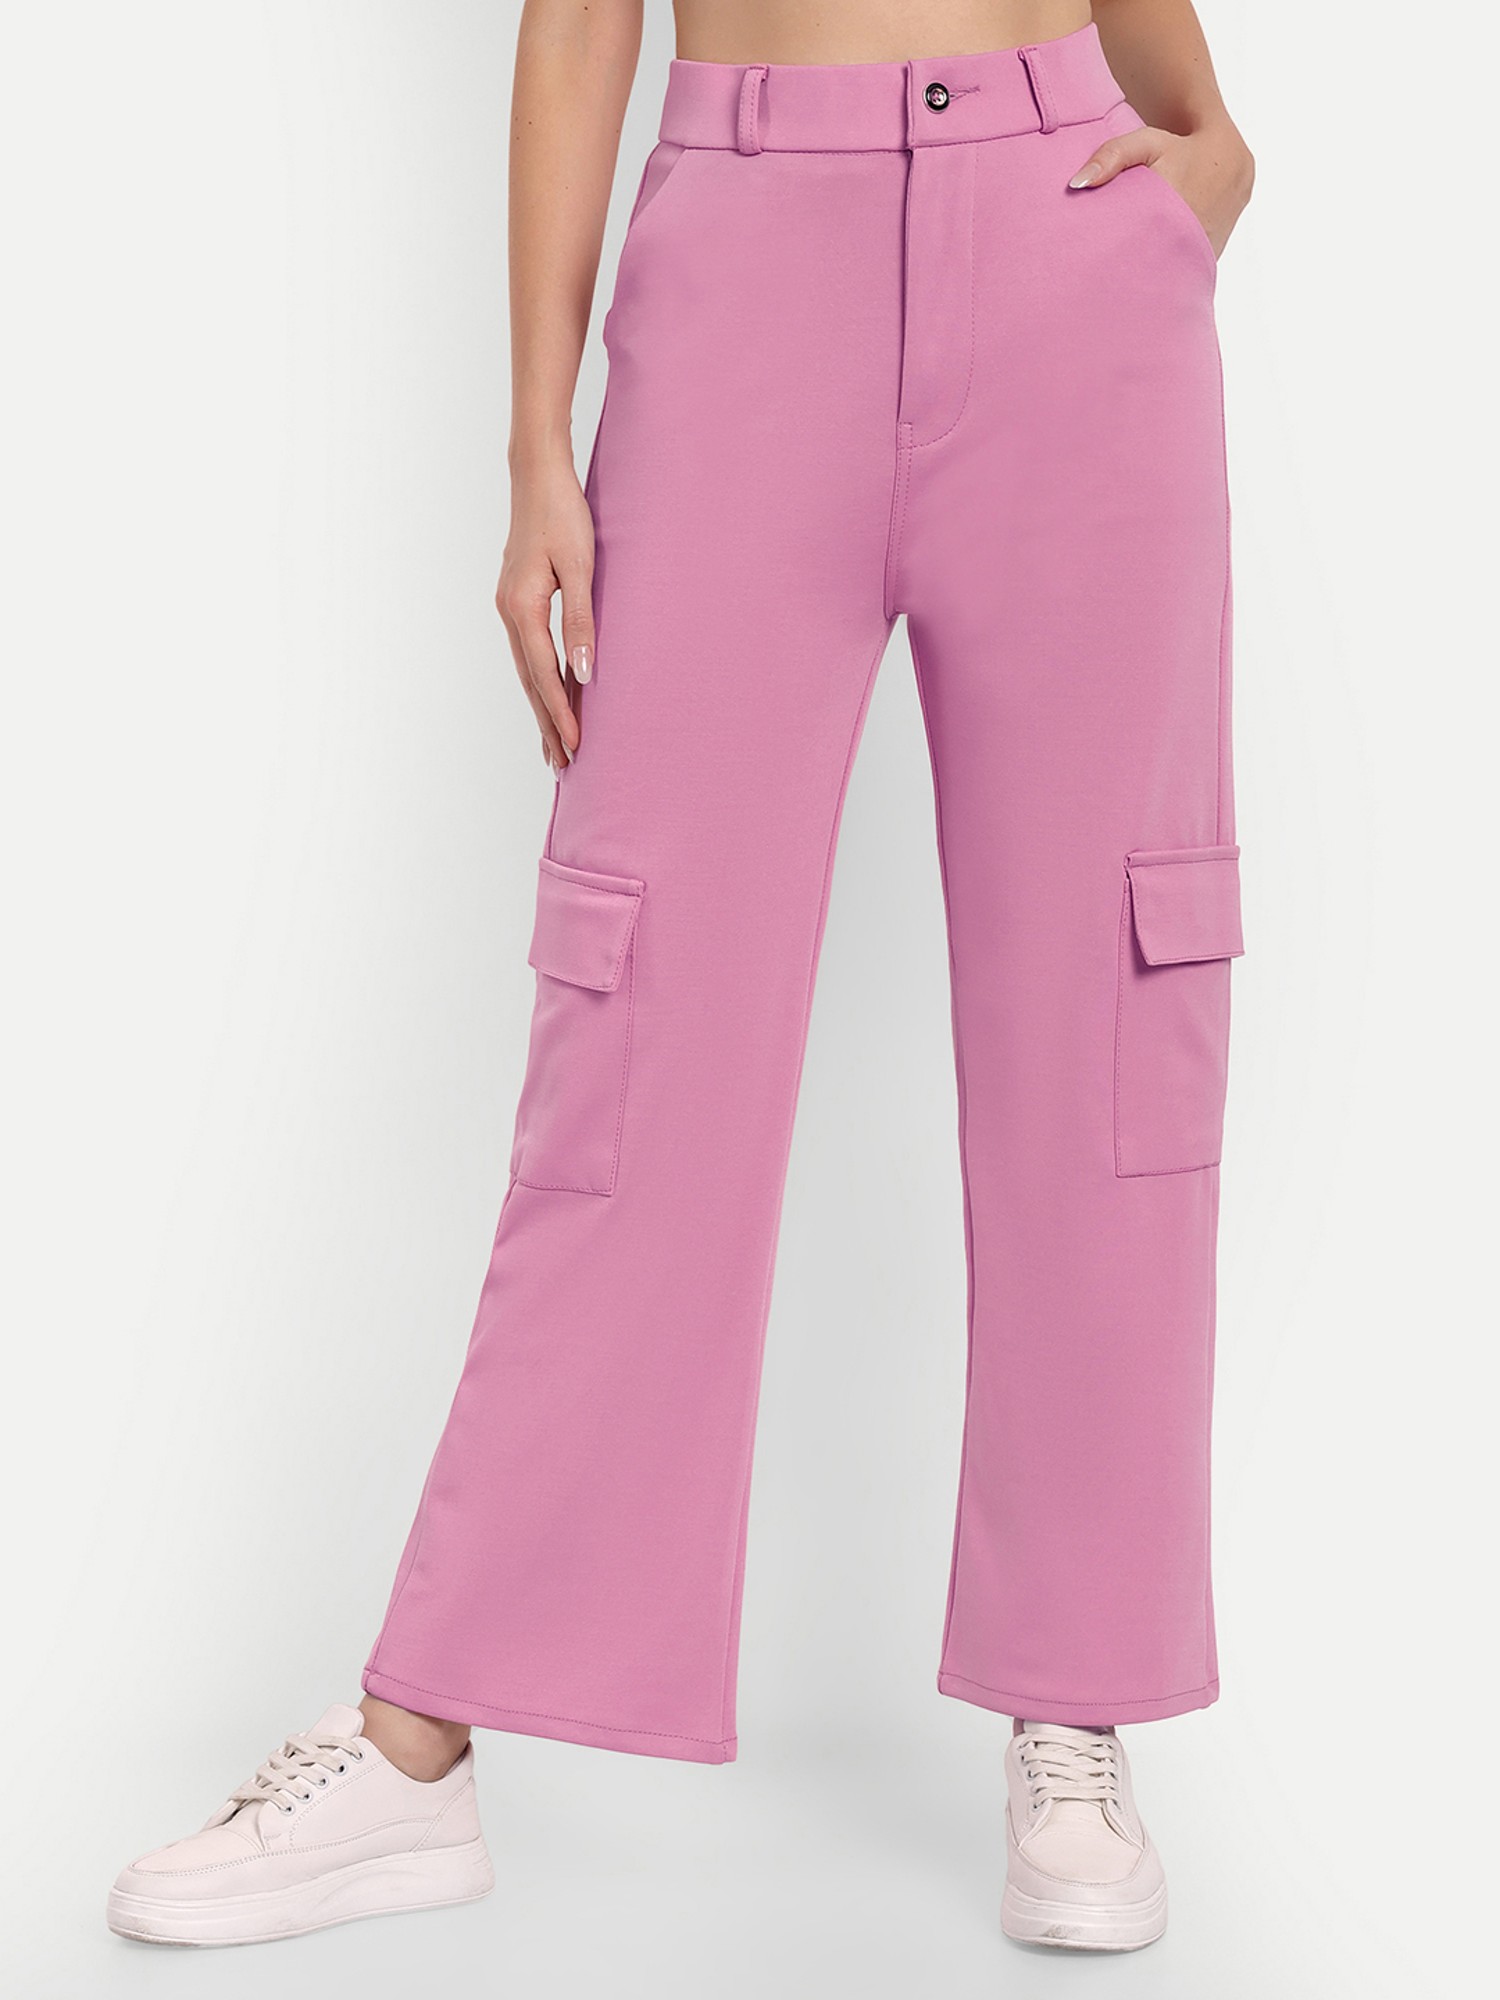 PUMA SWxP Cargo Pants Solid Women Pink Track Pants  Buy PUMA SWxP Cargo  Pants Solid Women Pink Track Pants Online at Best Prices in India   Flipkartcom